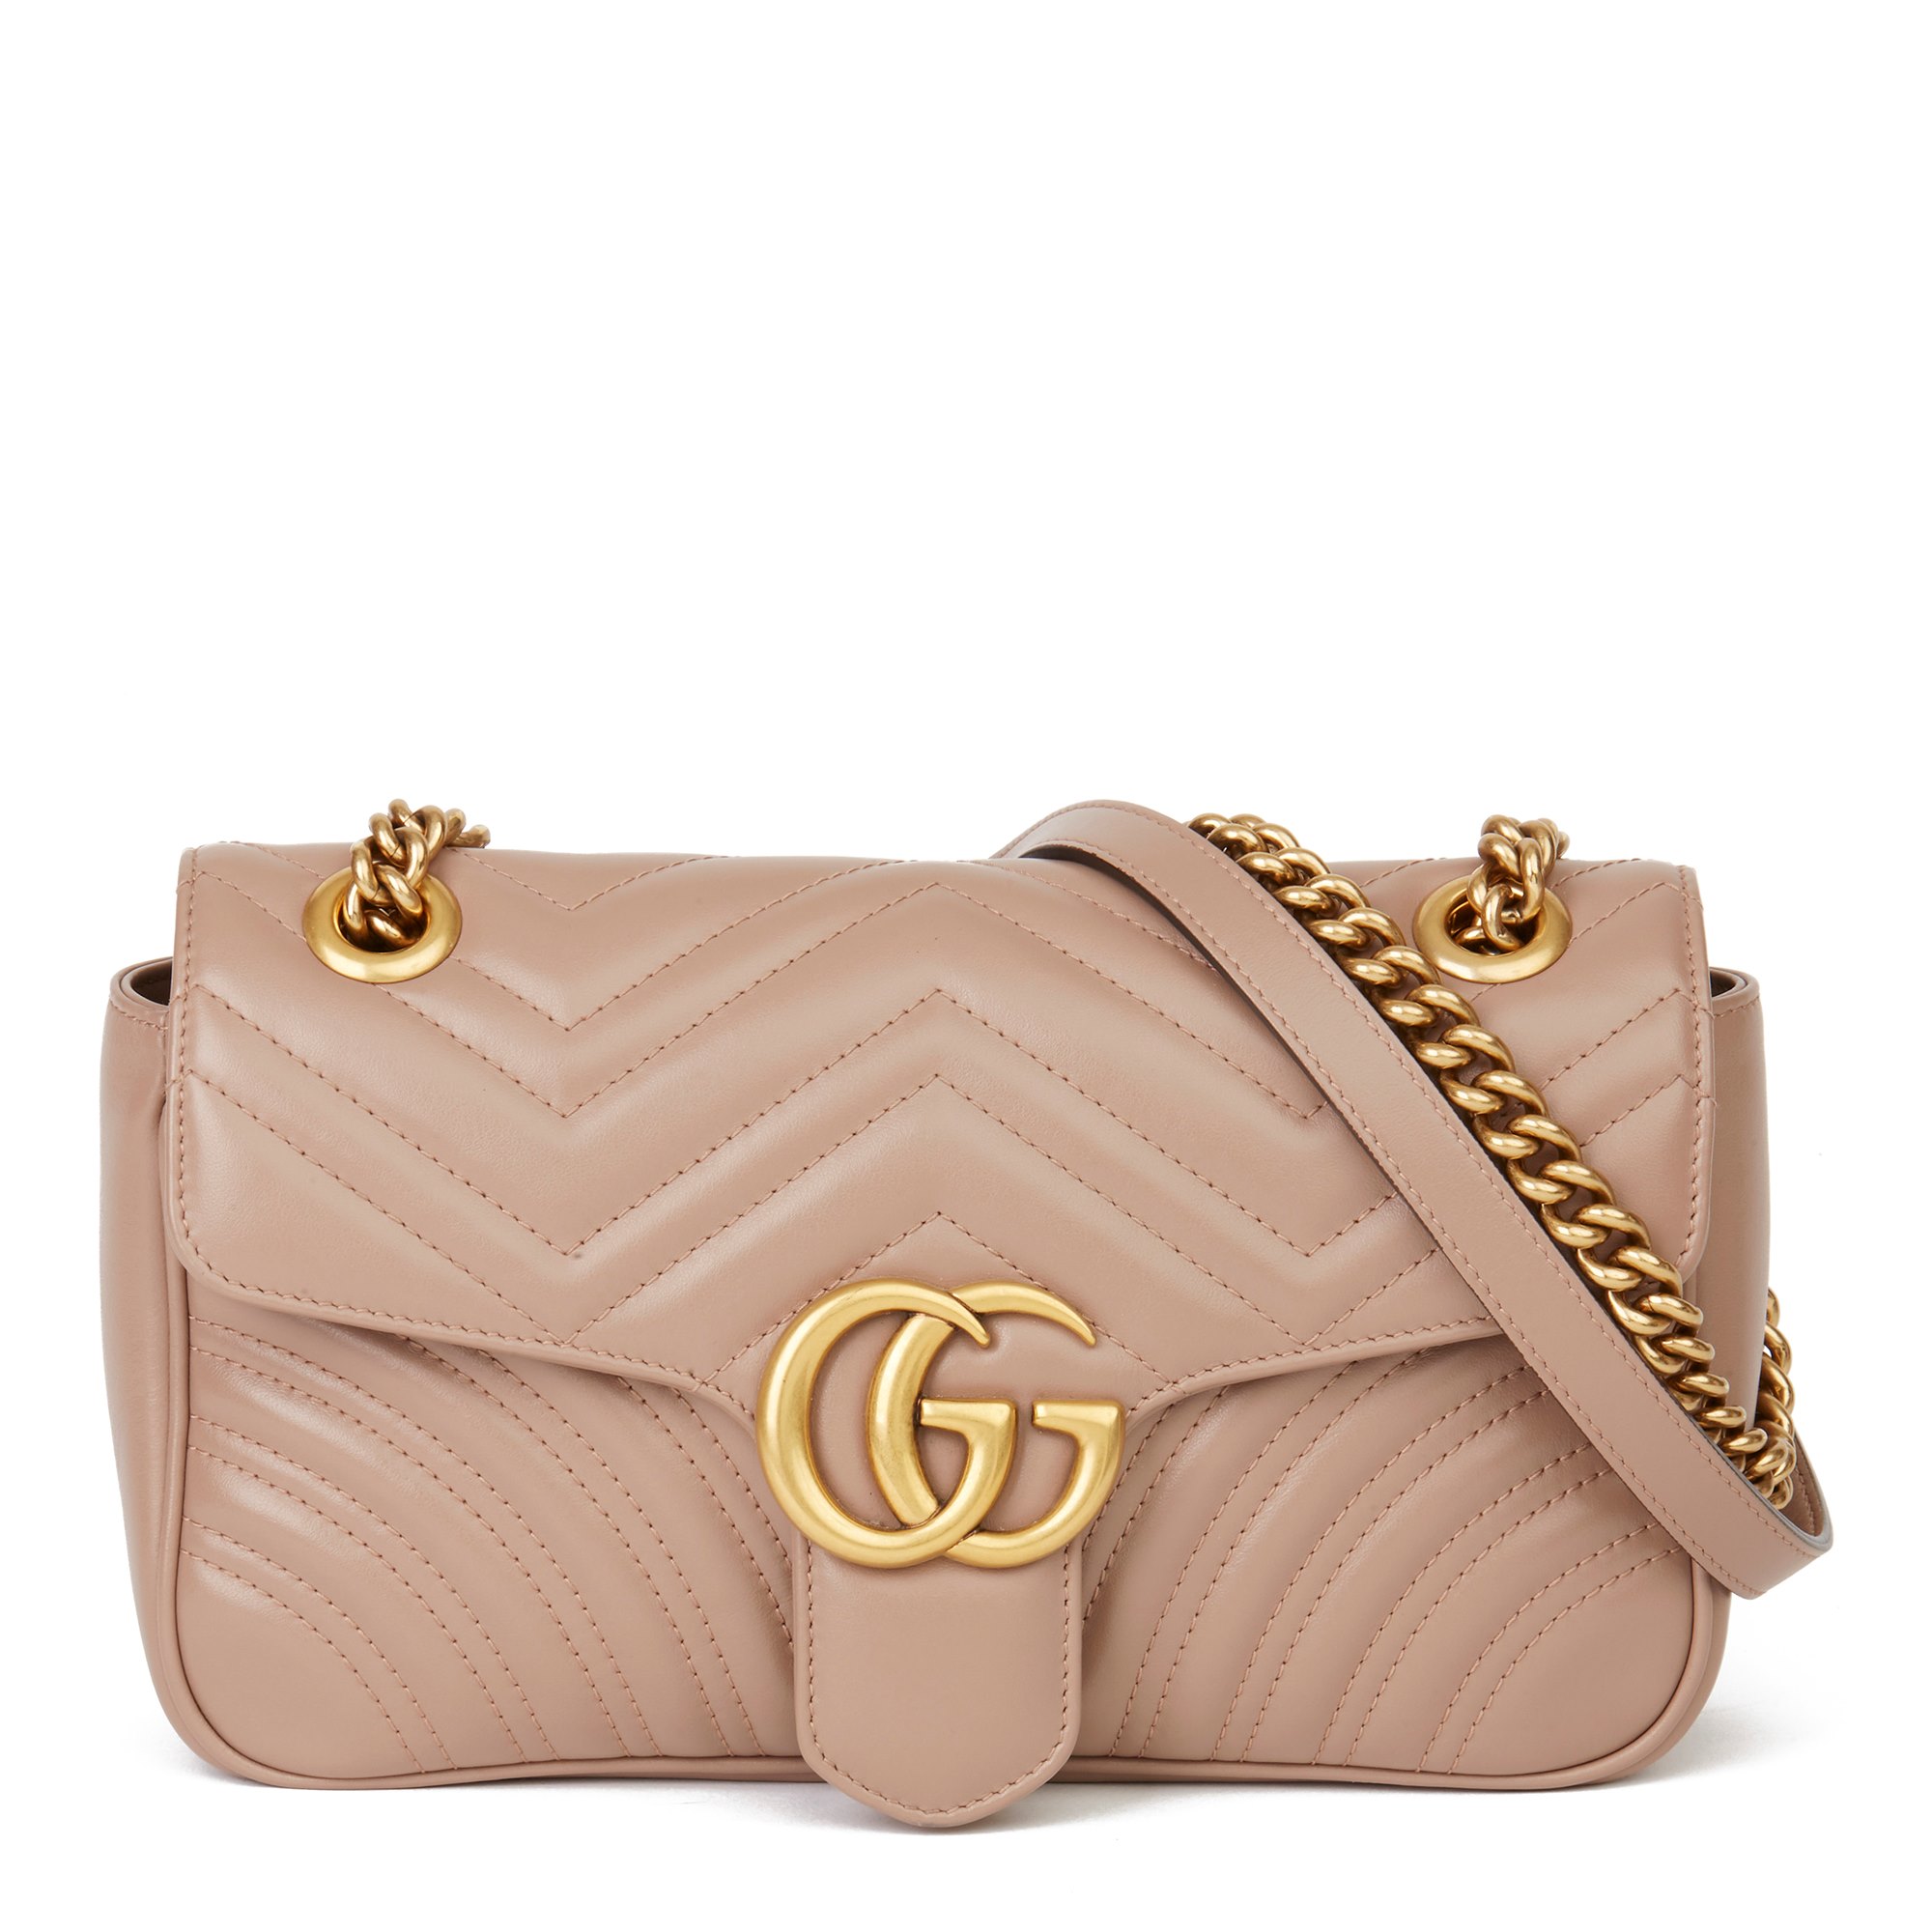 Gucci Marmont Purse Pinkfong | Paul Smith